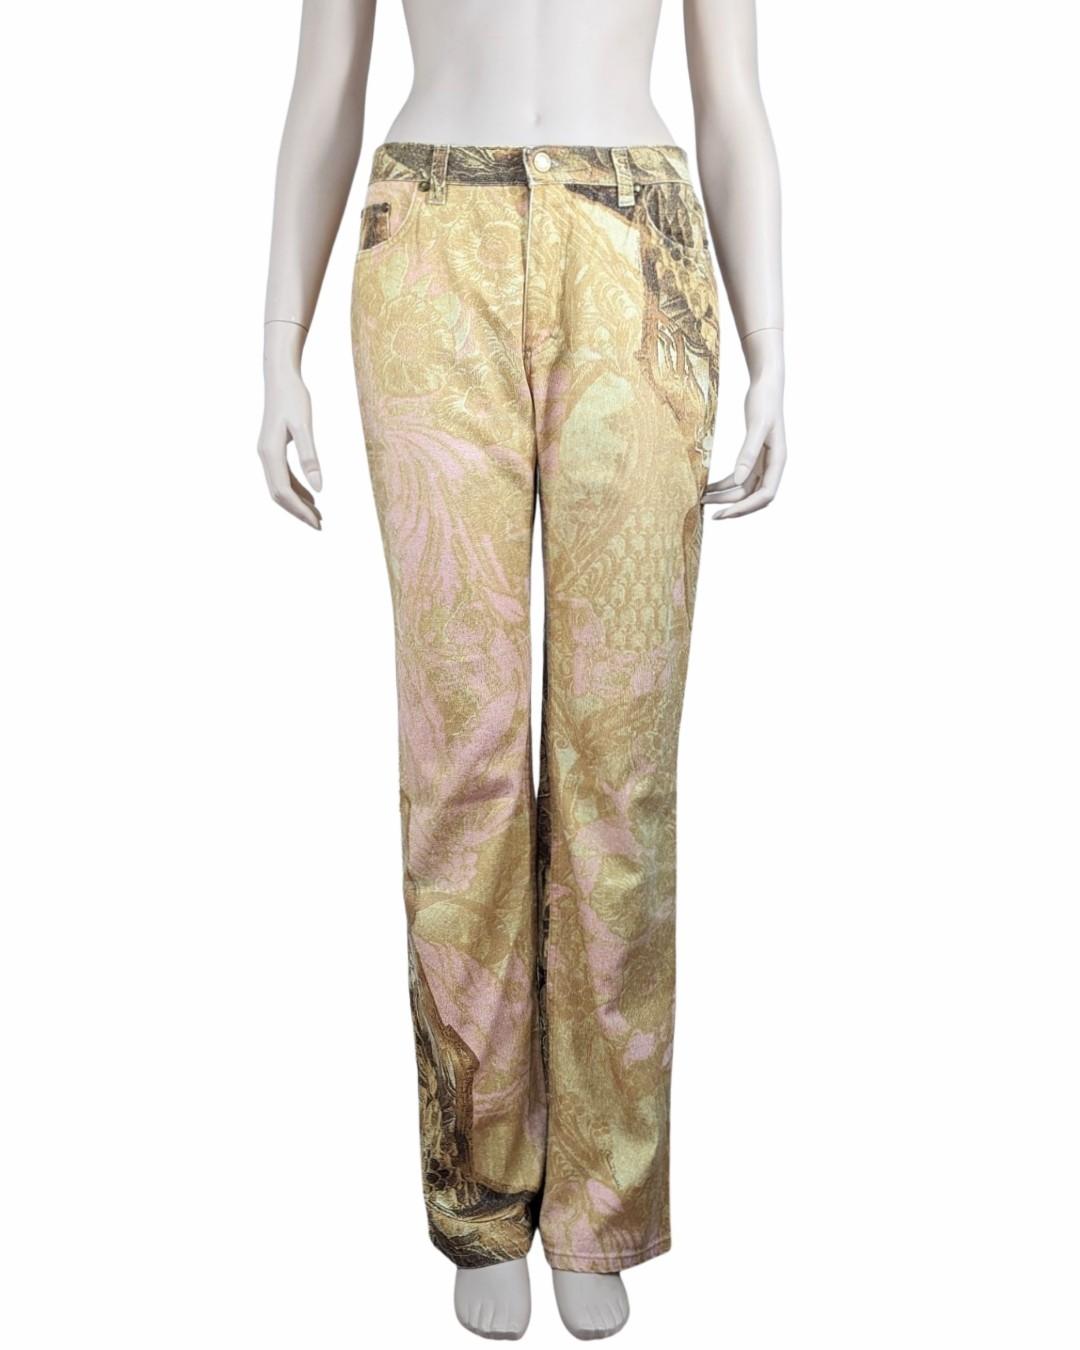 Roberto Cavalli F/W 2001 gold leaf pattern jeans with gold sparkles all around.

. Middle rise waist
· Slightly flared jeans
· Gold floral pattern all-over
. Sparkles embellishment

Size Fits XS to M 36FR
Tag size S but fits large as you can see on